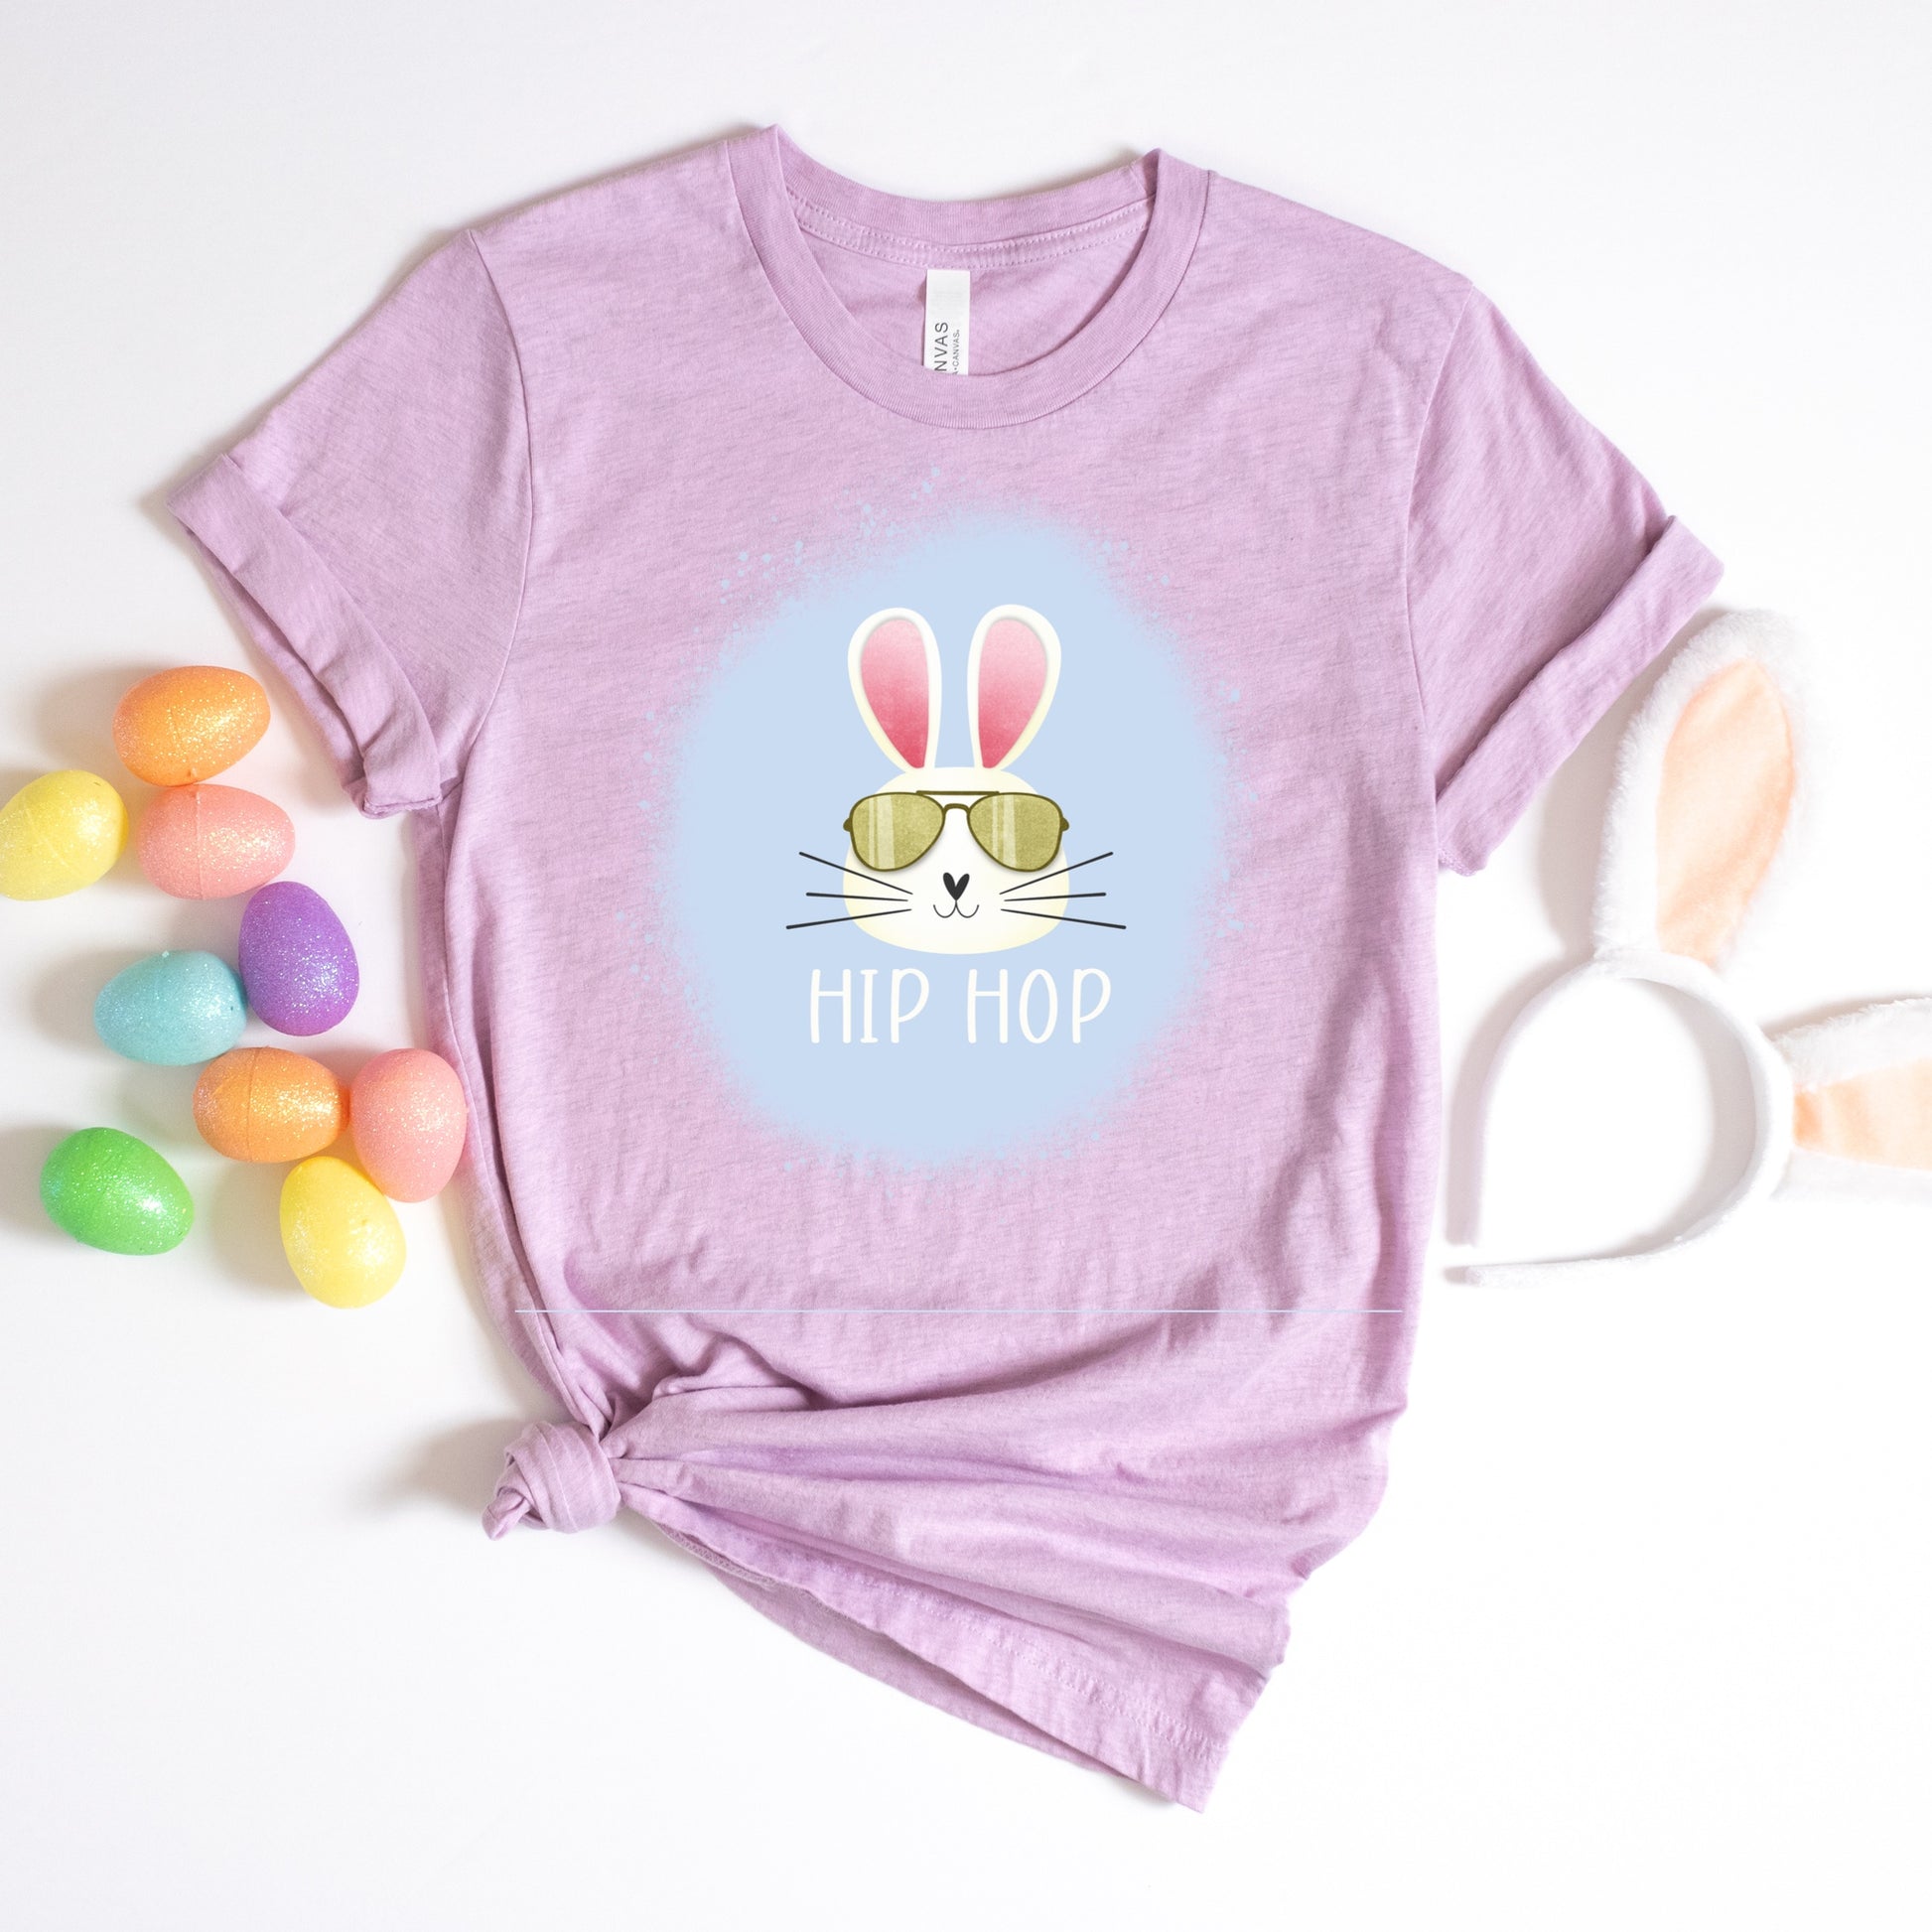 Easter Iron On Heat Transfer with easter bunny wearing aviator sunglasses and the phrase "Hip Hop"